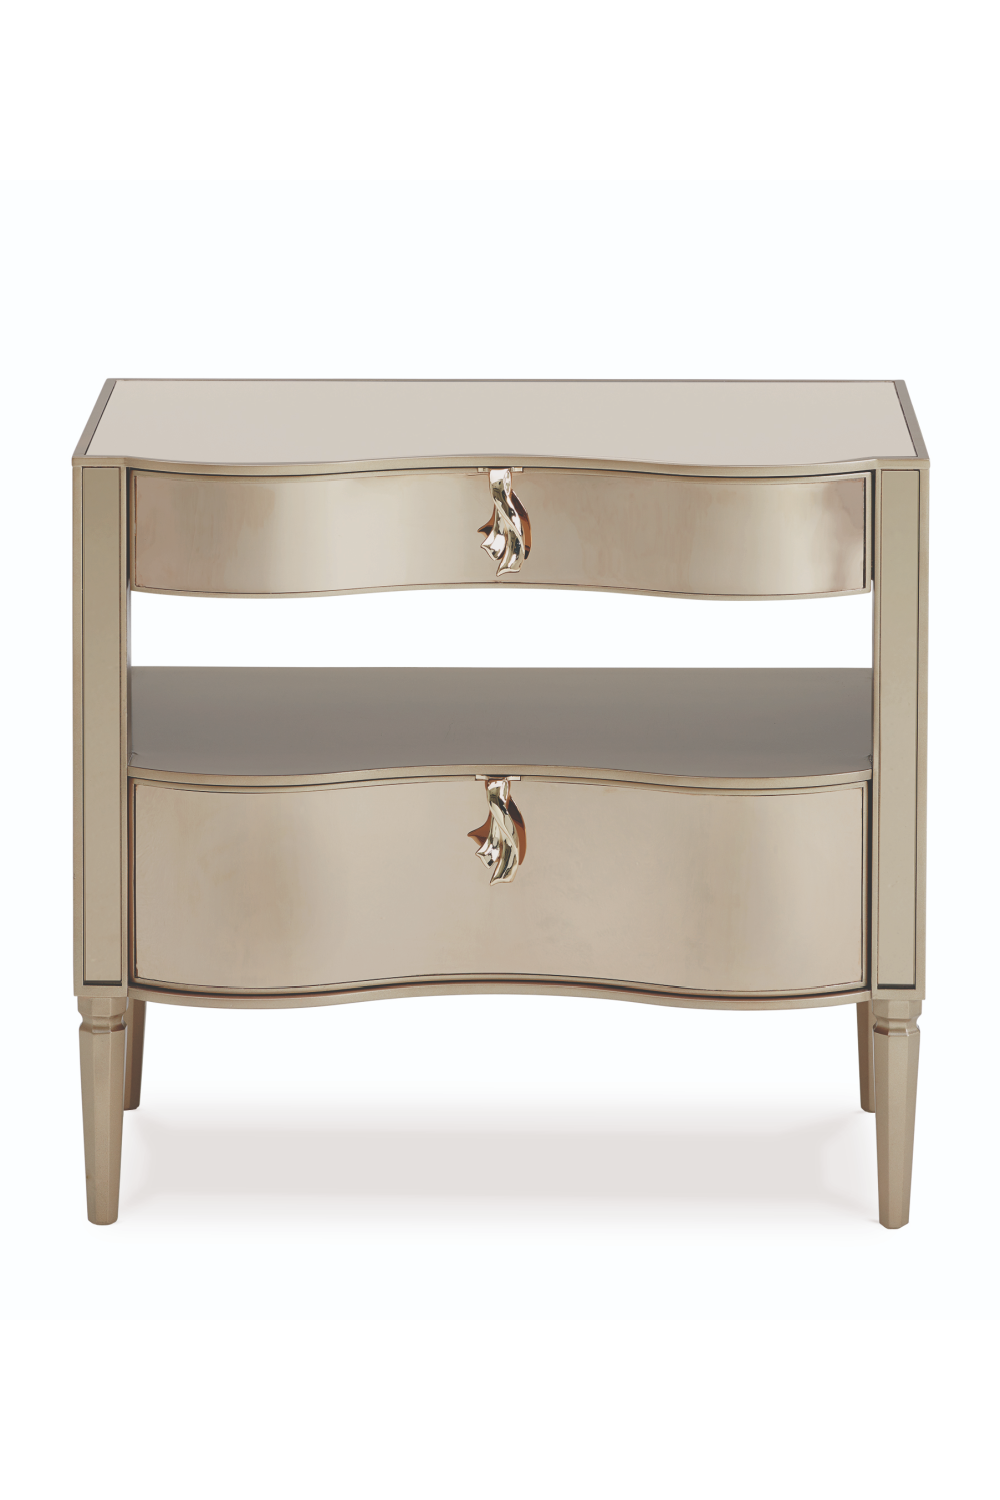 Gold Modern Bedside Table | Caracole It's A Small Wonder | Oroa.com